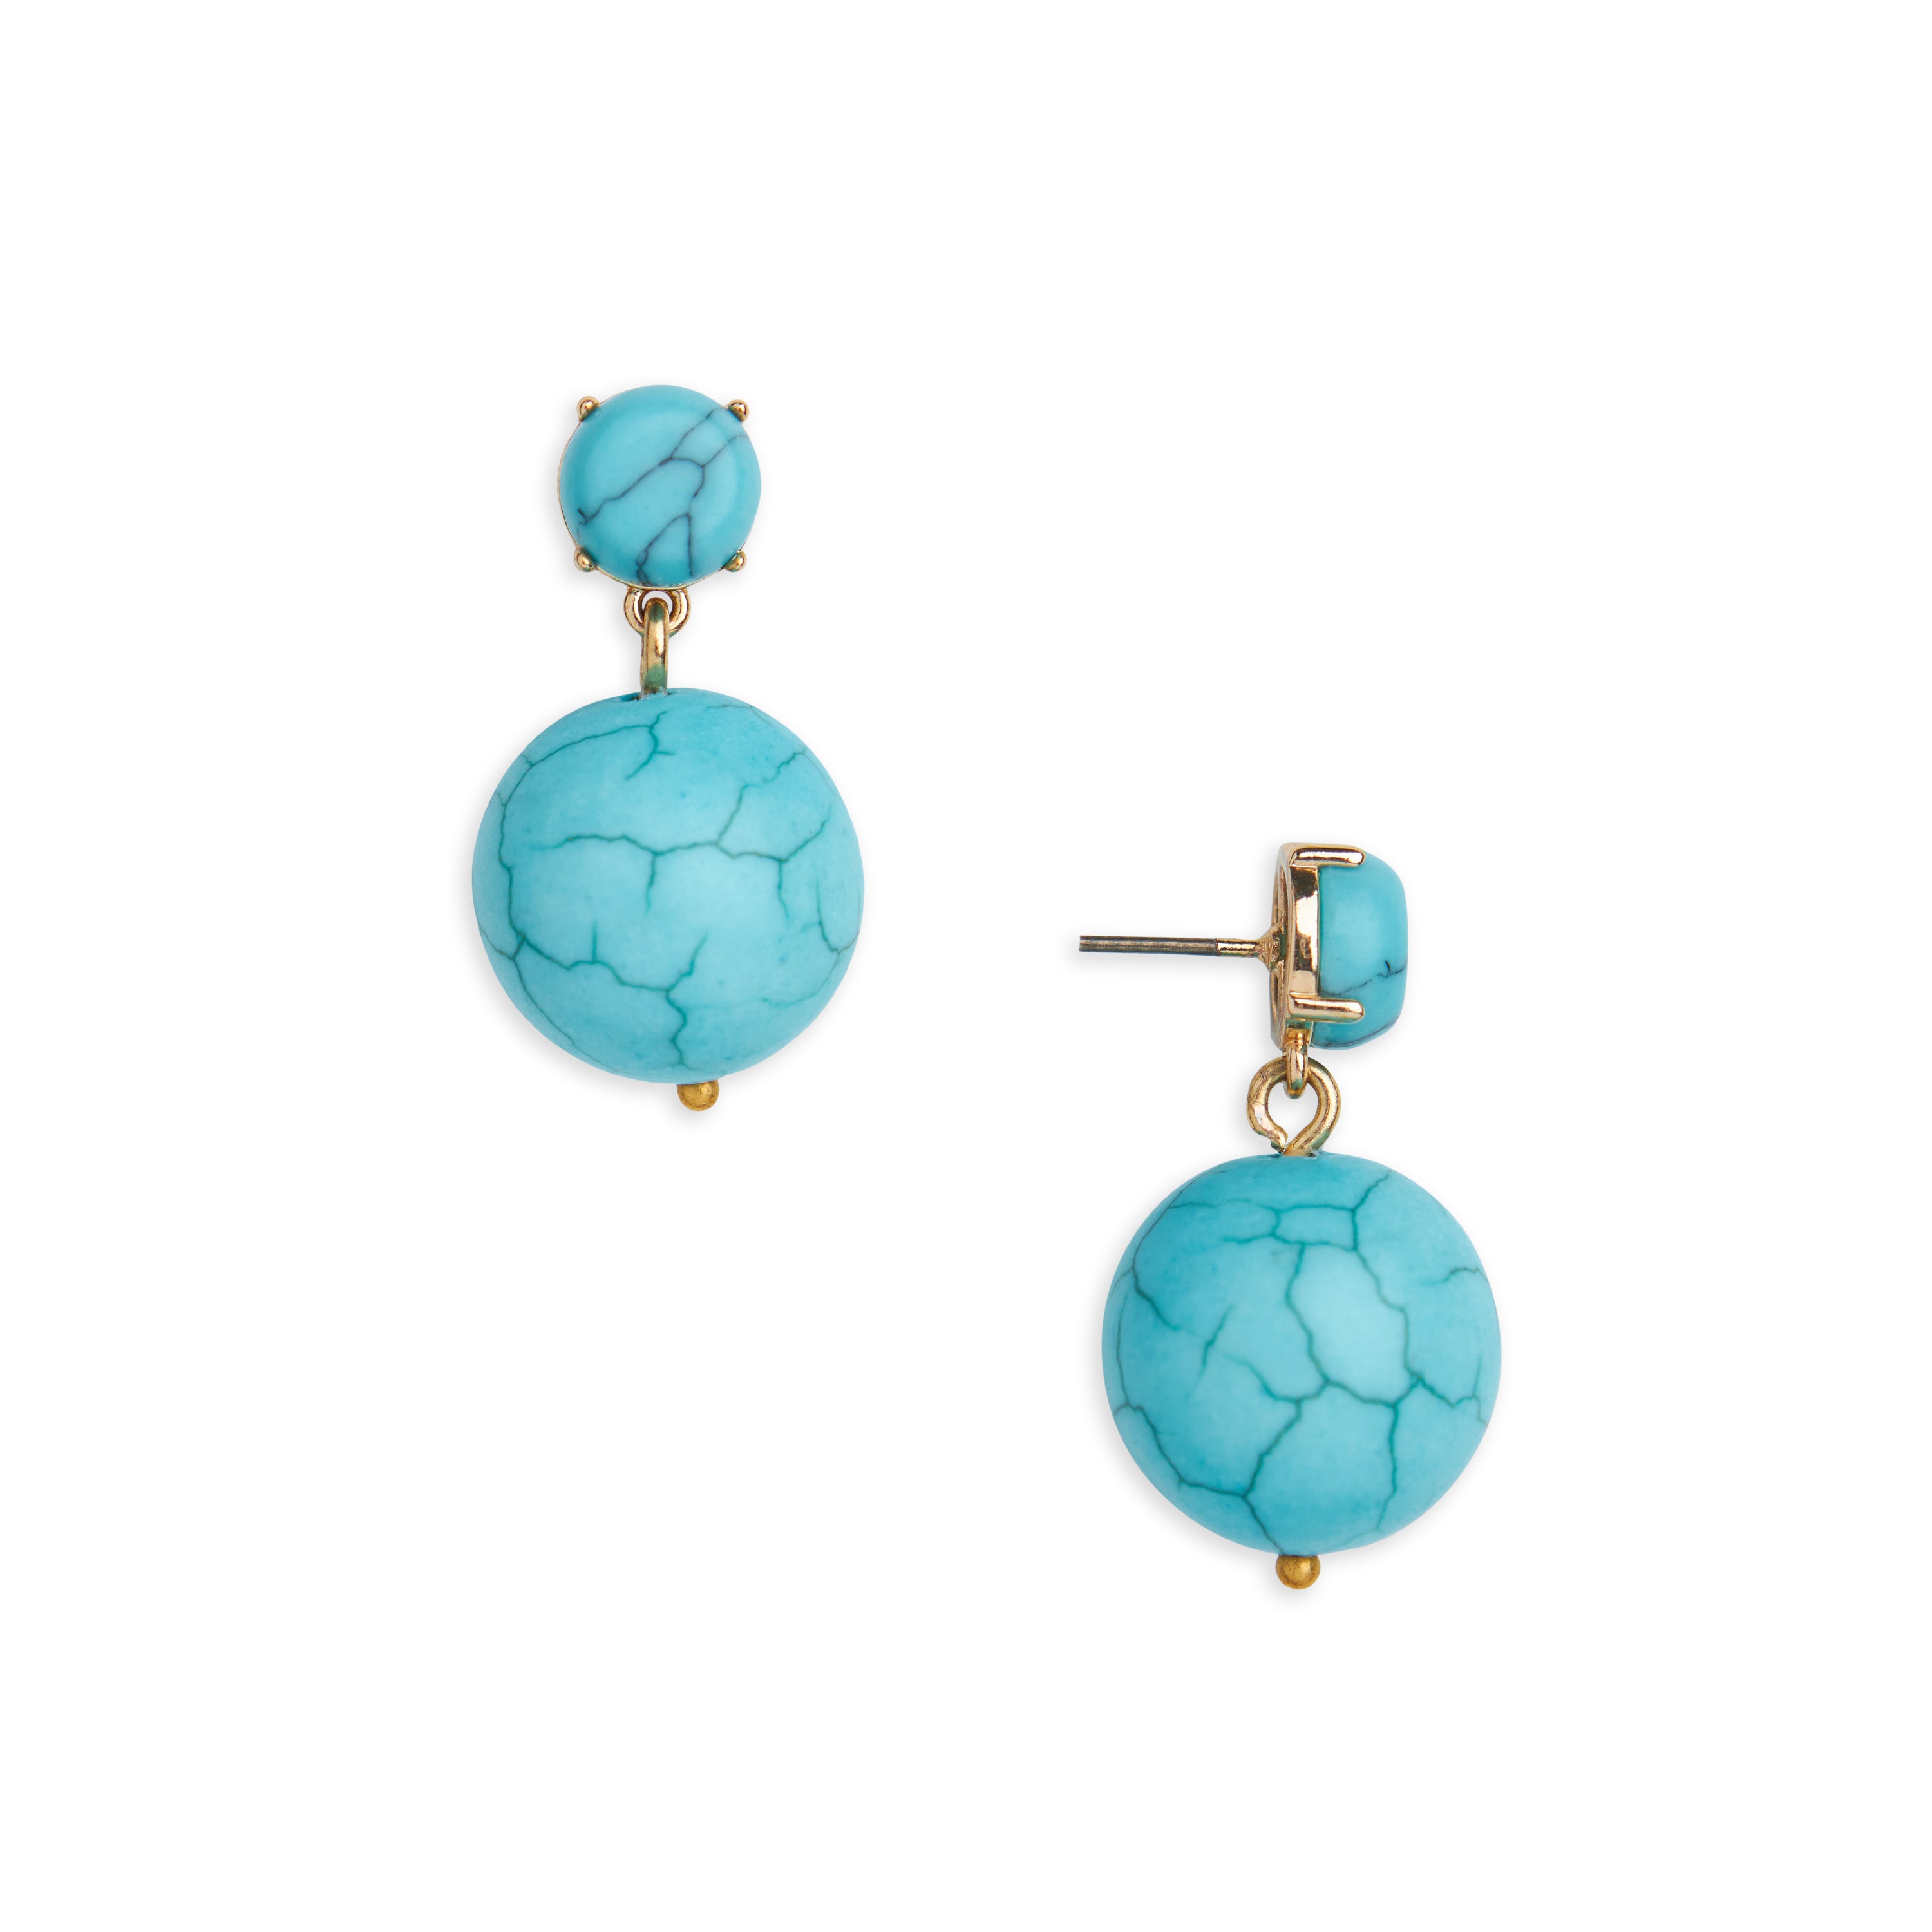 Turquoise Gumball Drops